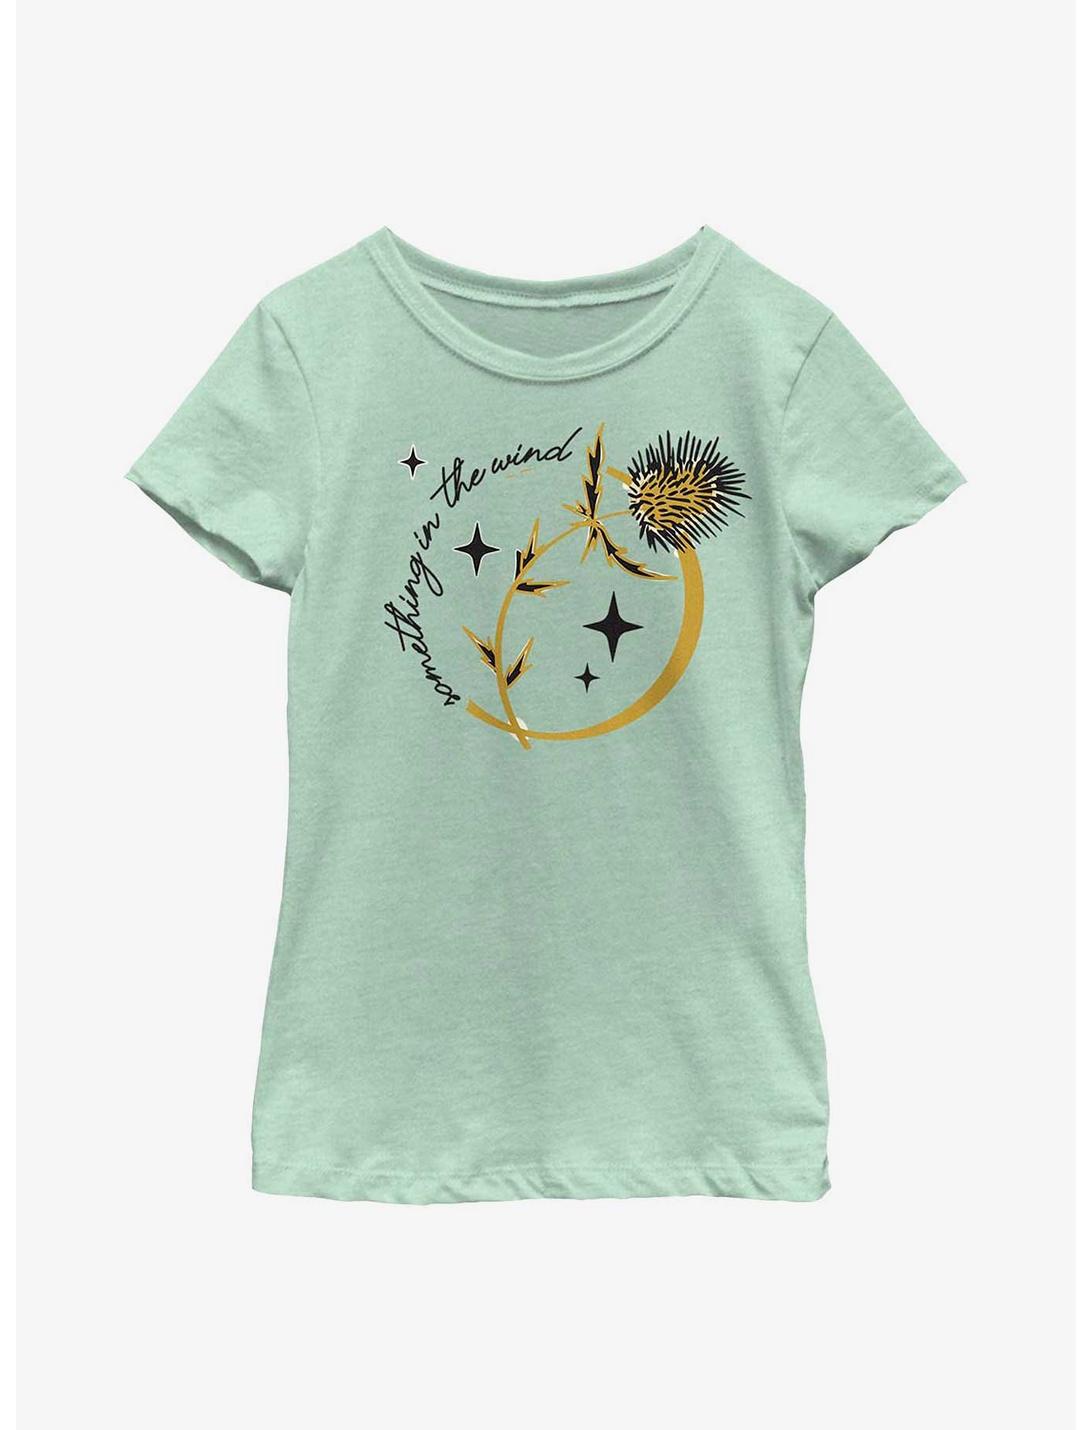 Disney The Nightmare Before Christmas The Wind Youth Girls T-Shirt, MINT, hi-res